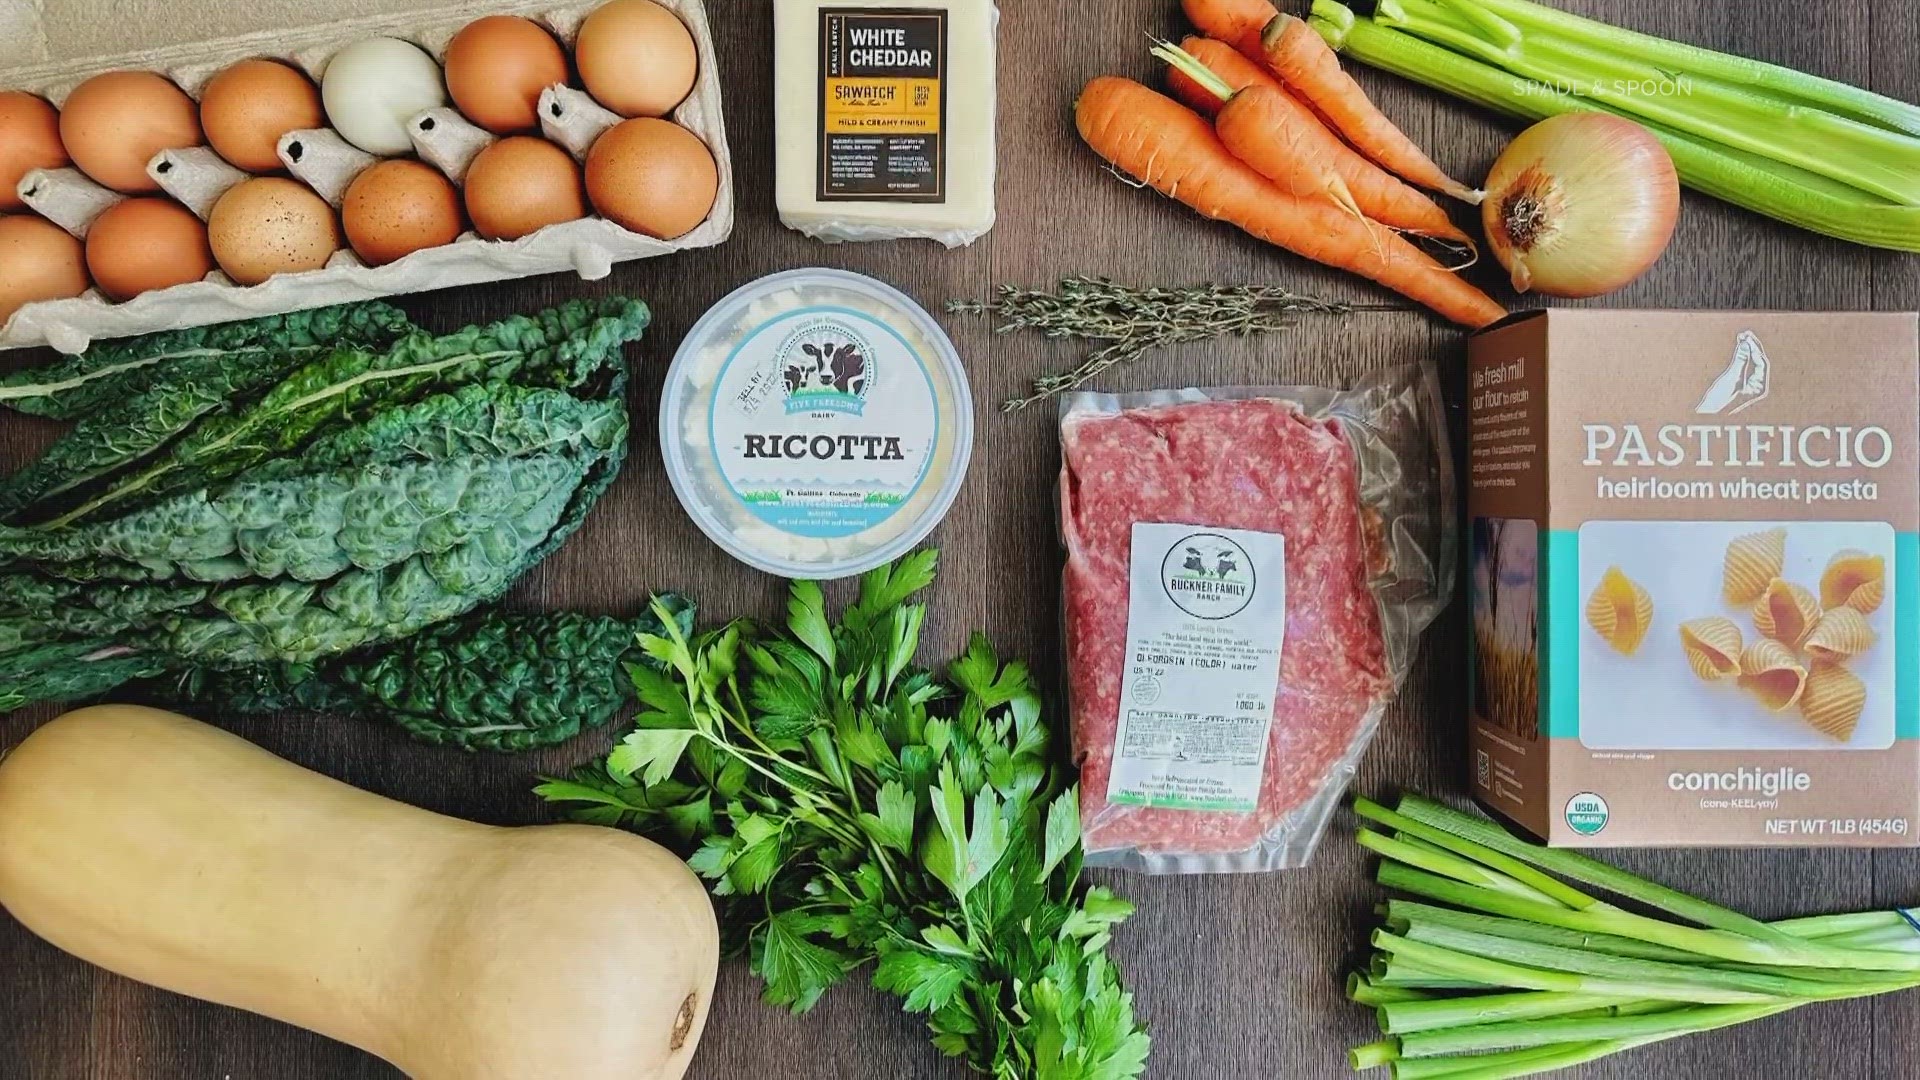 Denver-based Spade & Spoon, a local meal kit company has a mission to make it simple to shop, cook and eat locally.